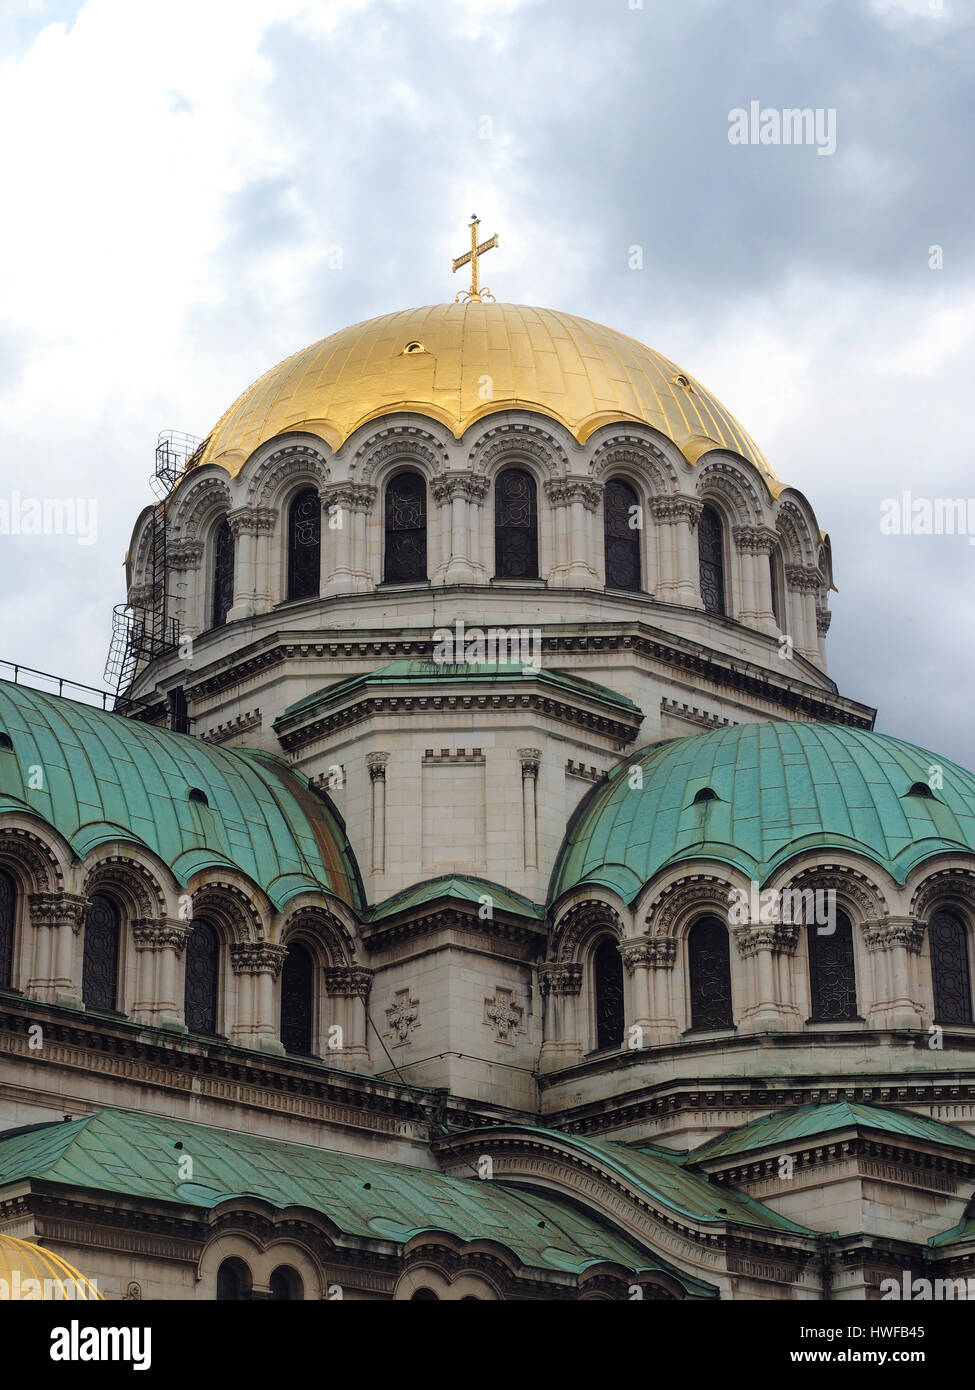 Alexander Nevsky Cathedral Sofia Bulgaria Europe gold dome detail architectural detail Stock Photo